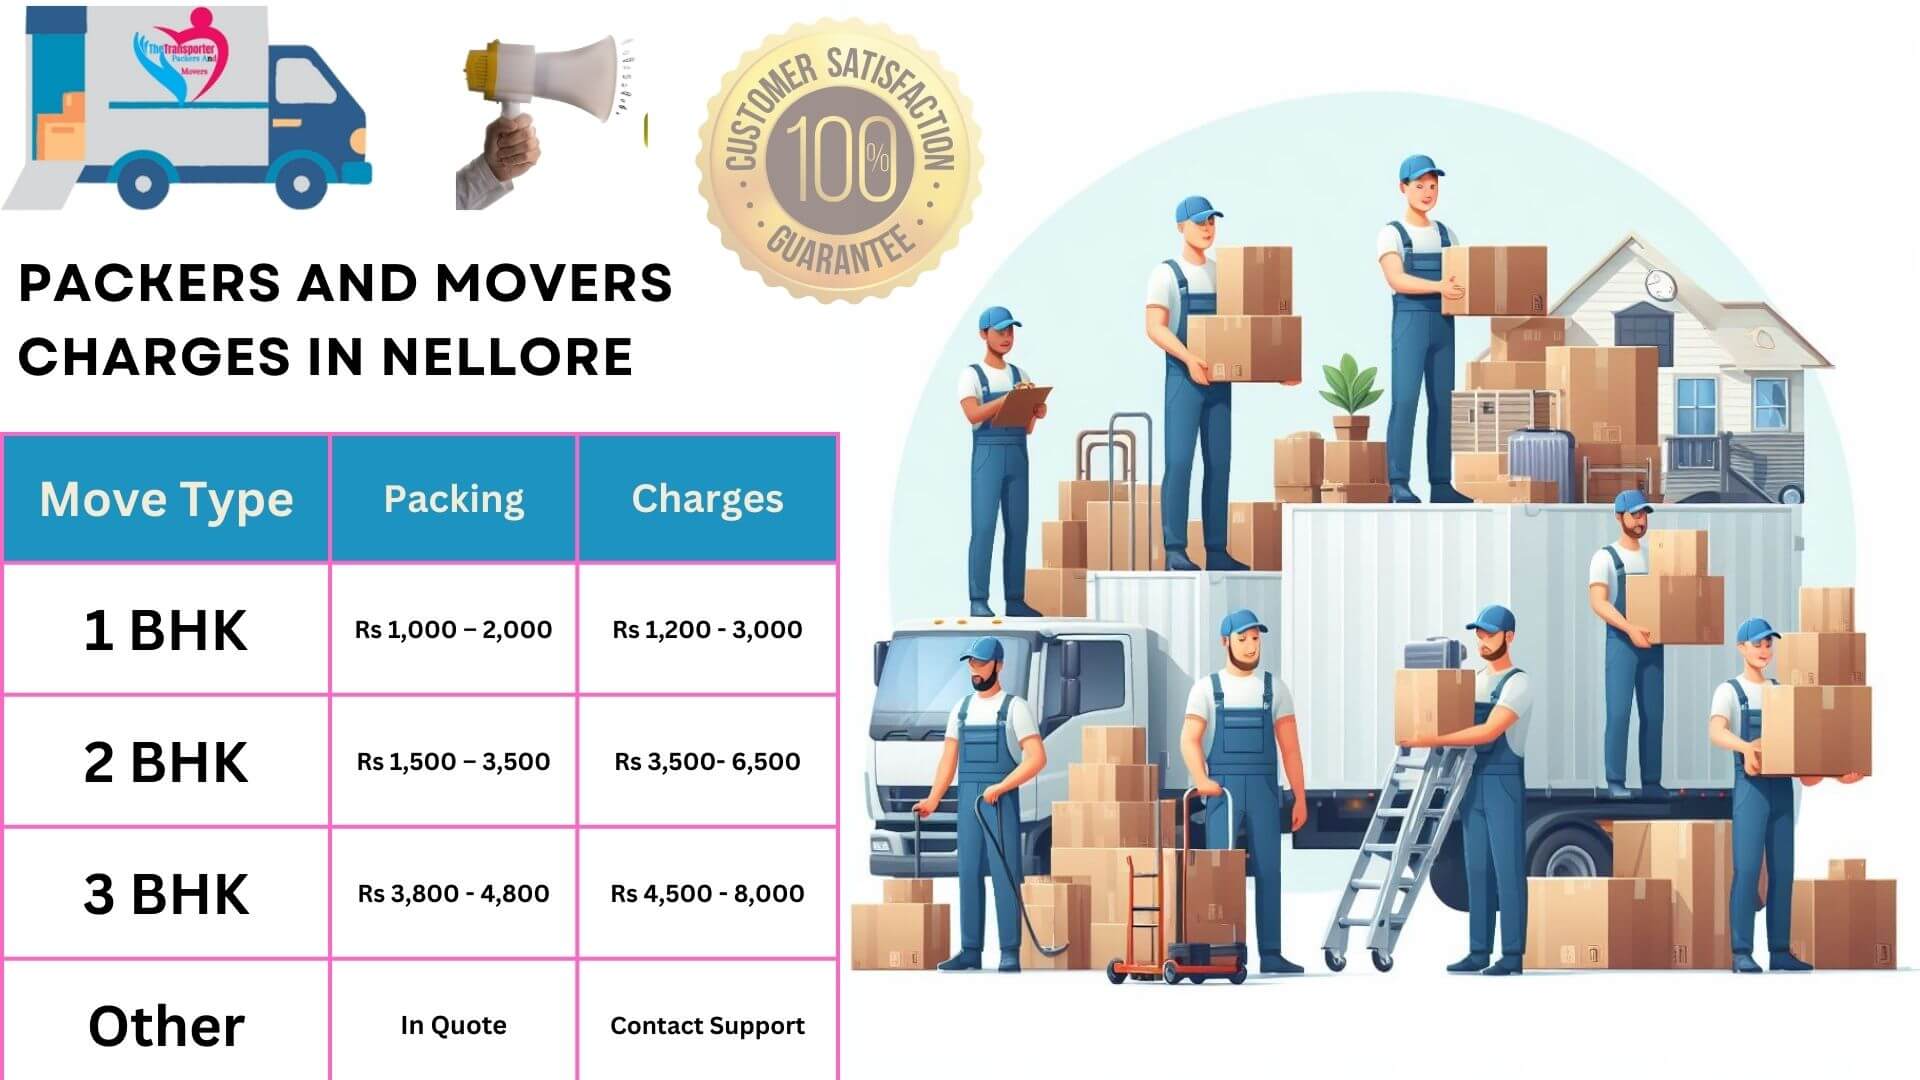 TheTransporter Packers and movers Charges list in Nellore 